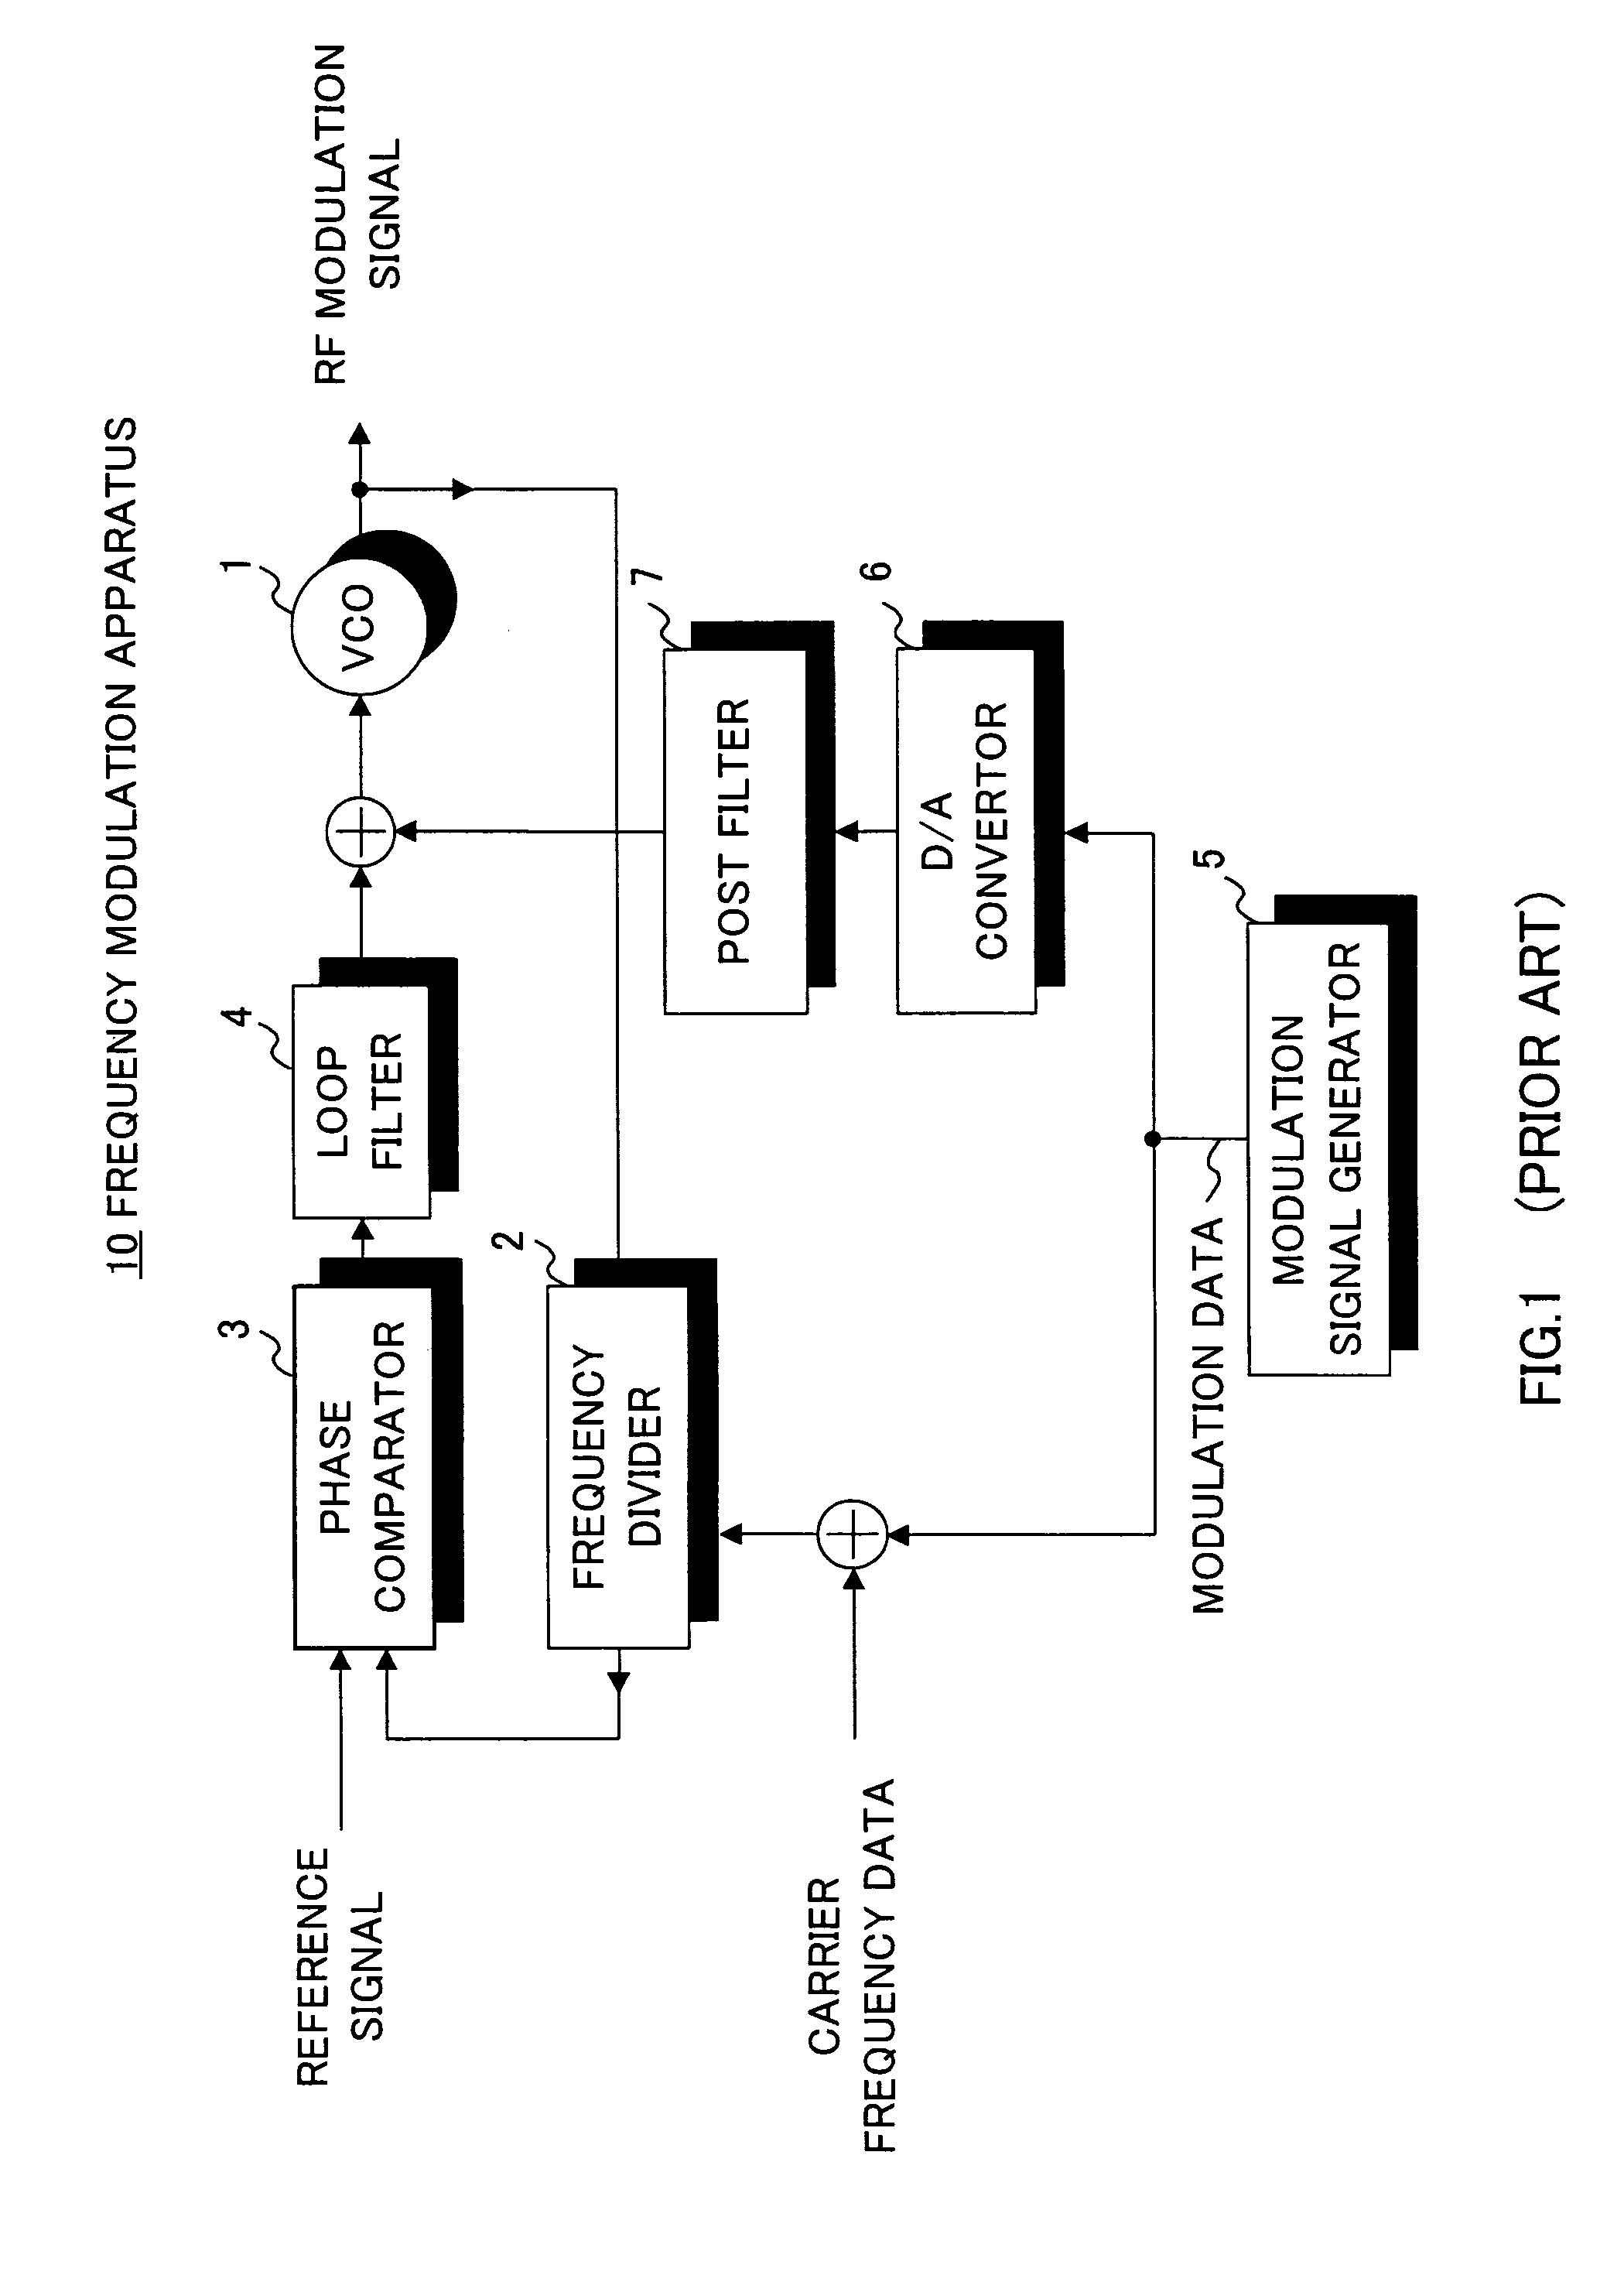 Two-point frequency modulation apparatus